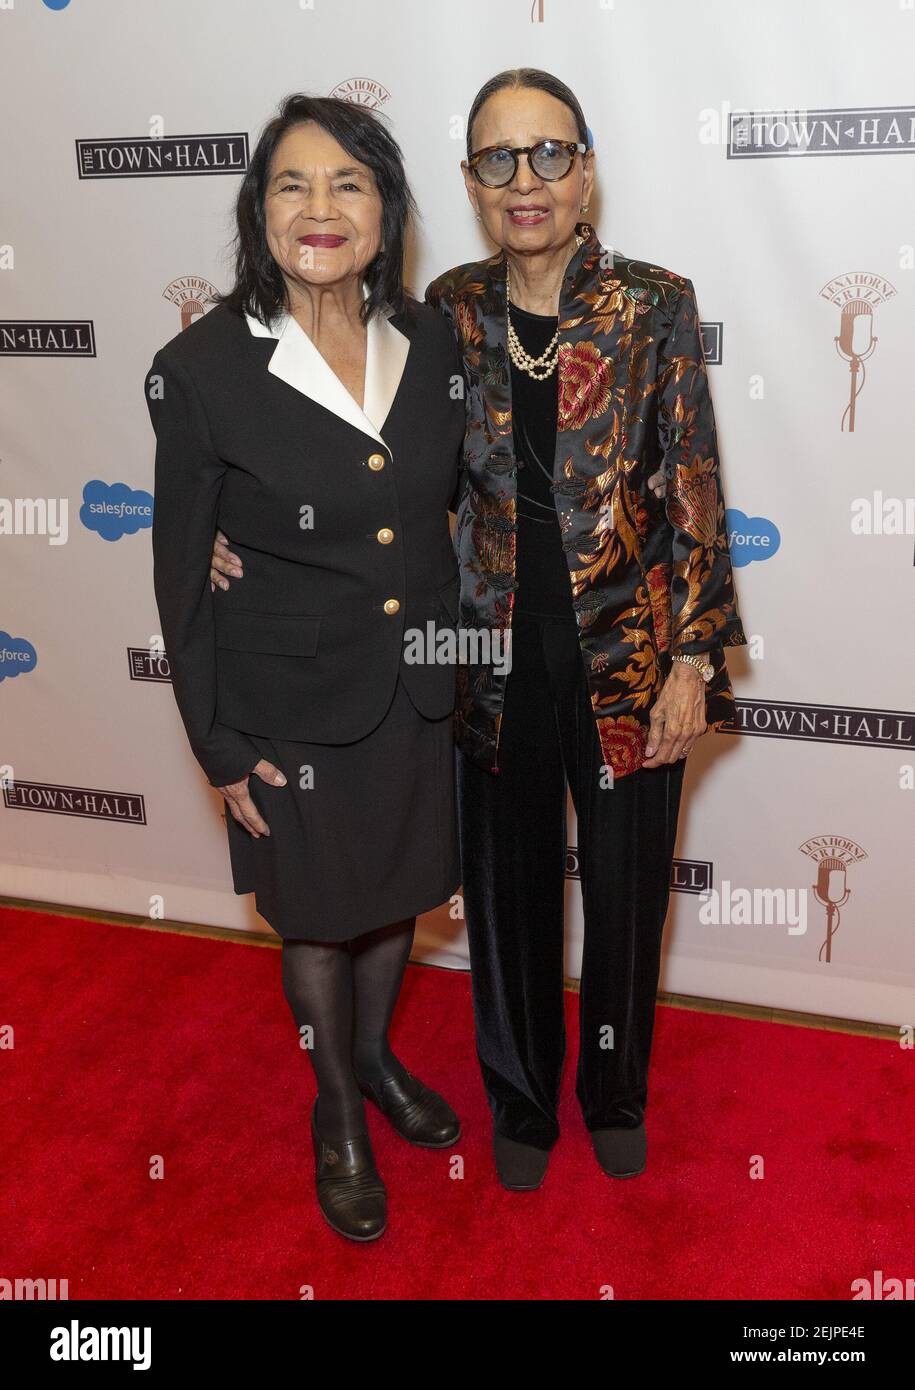 Fremkald Begyndelsen Styre Dolores Huerta and Gail Lumet Buckley attend The Lena Horne Prize for  Artists Creating Social Impact inaugural celebration at The Town Hall  (Photo by Lev Radin/Pacific Press/Sipa USA Stock Photo - Alamy